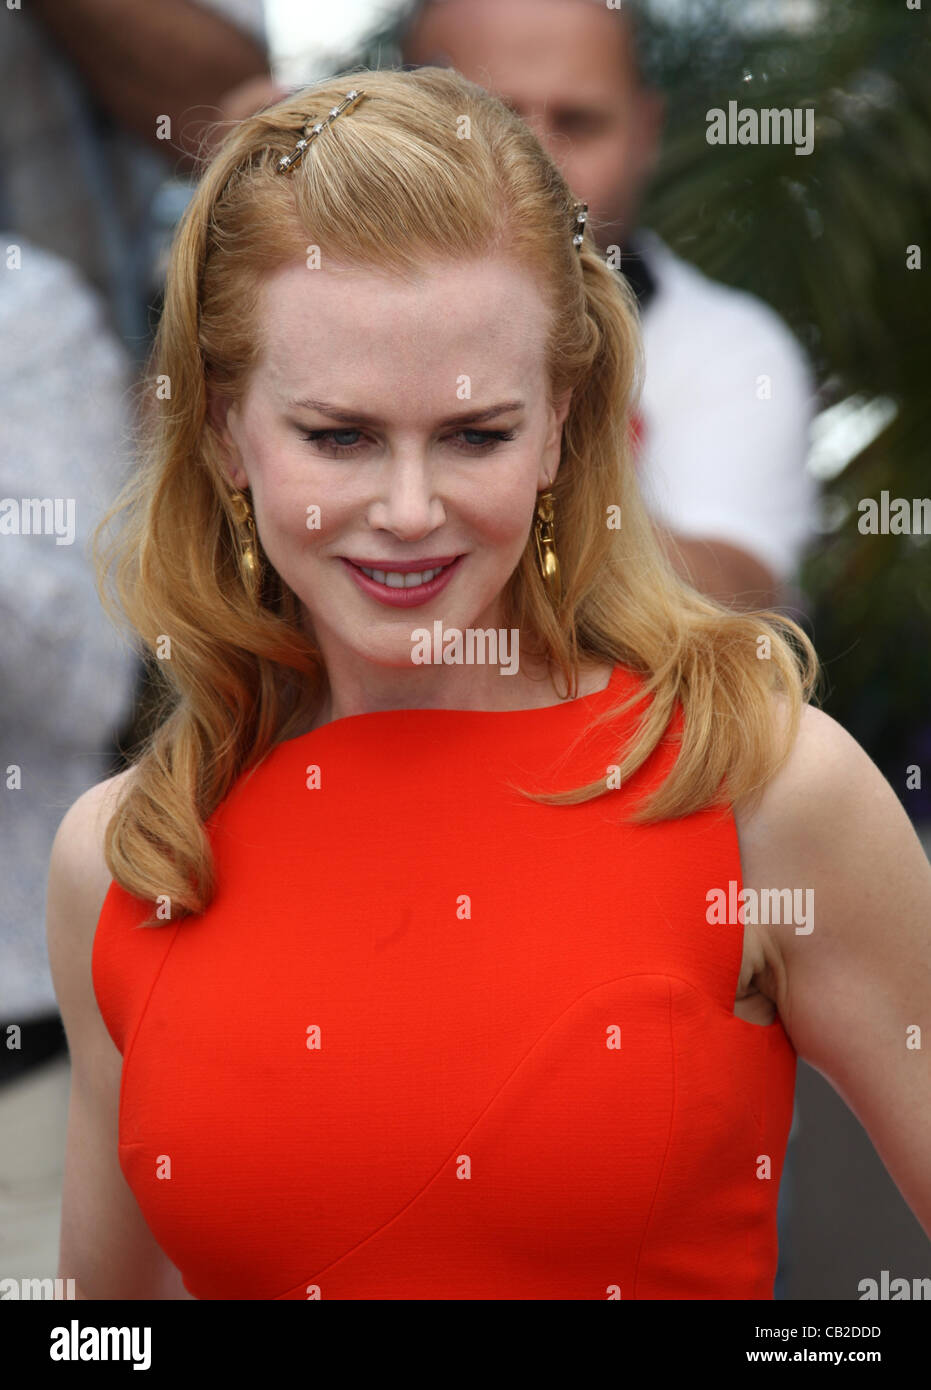 NICOLE KIDMAN THE PAPERBOY PHOTOCALL CANNES FILM FESTIVAL 2012 PALAIS DES FESTIVAL CANNES FRANCE 24 May 2012 Stock Photo